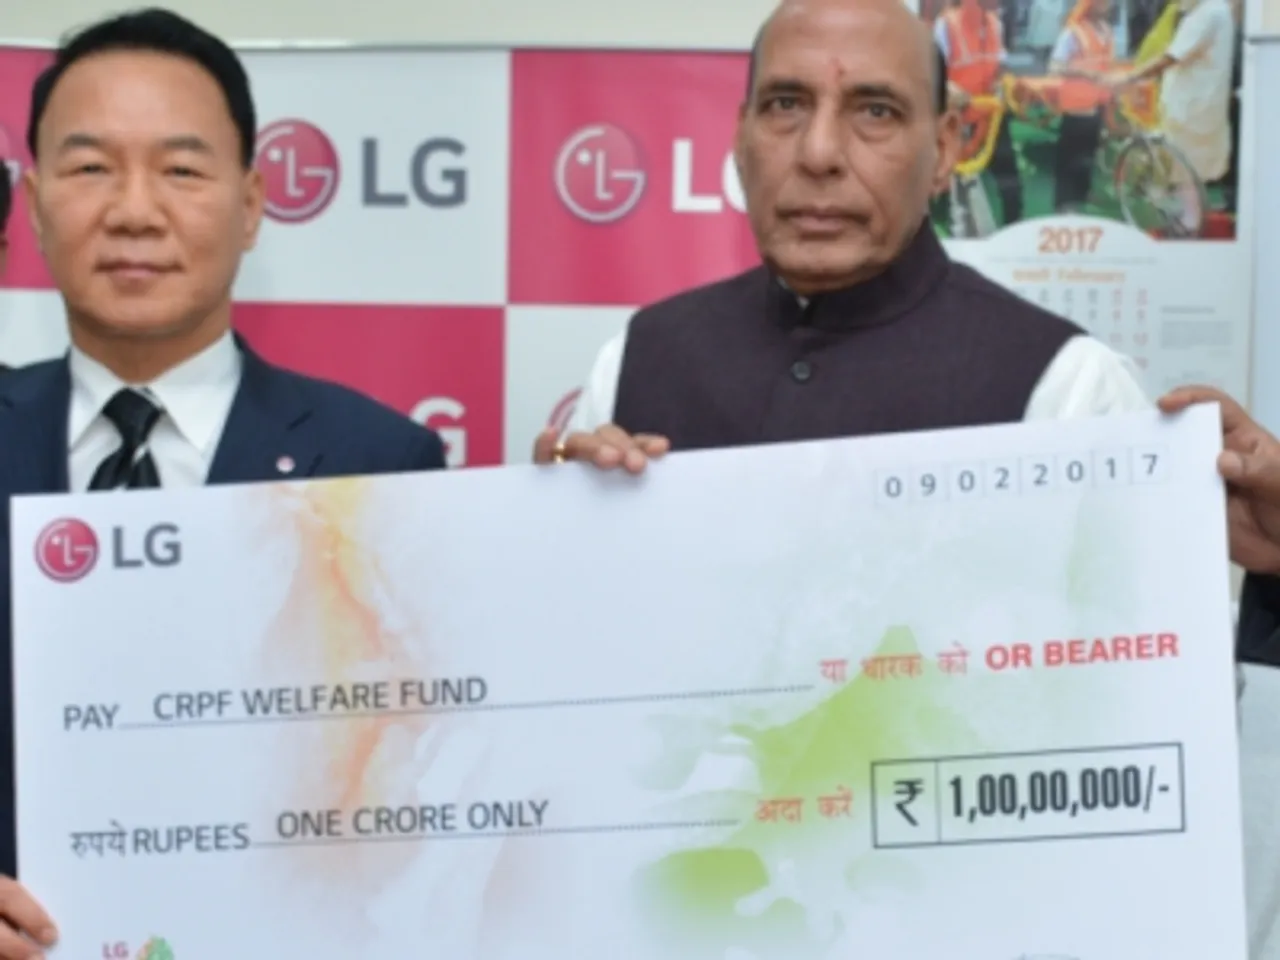 LG’s #KarSalaam Initiative Salutes The Spirit Of Indian Soldiers